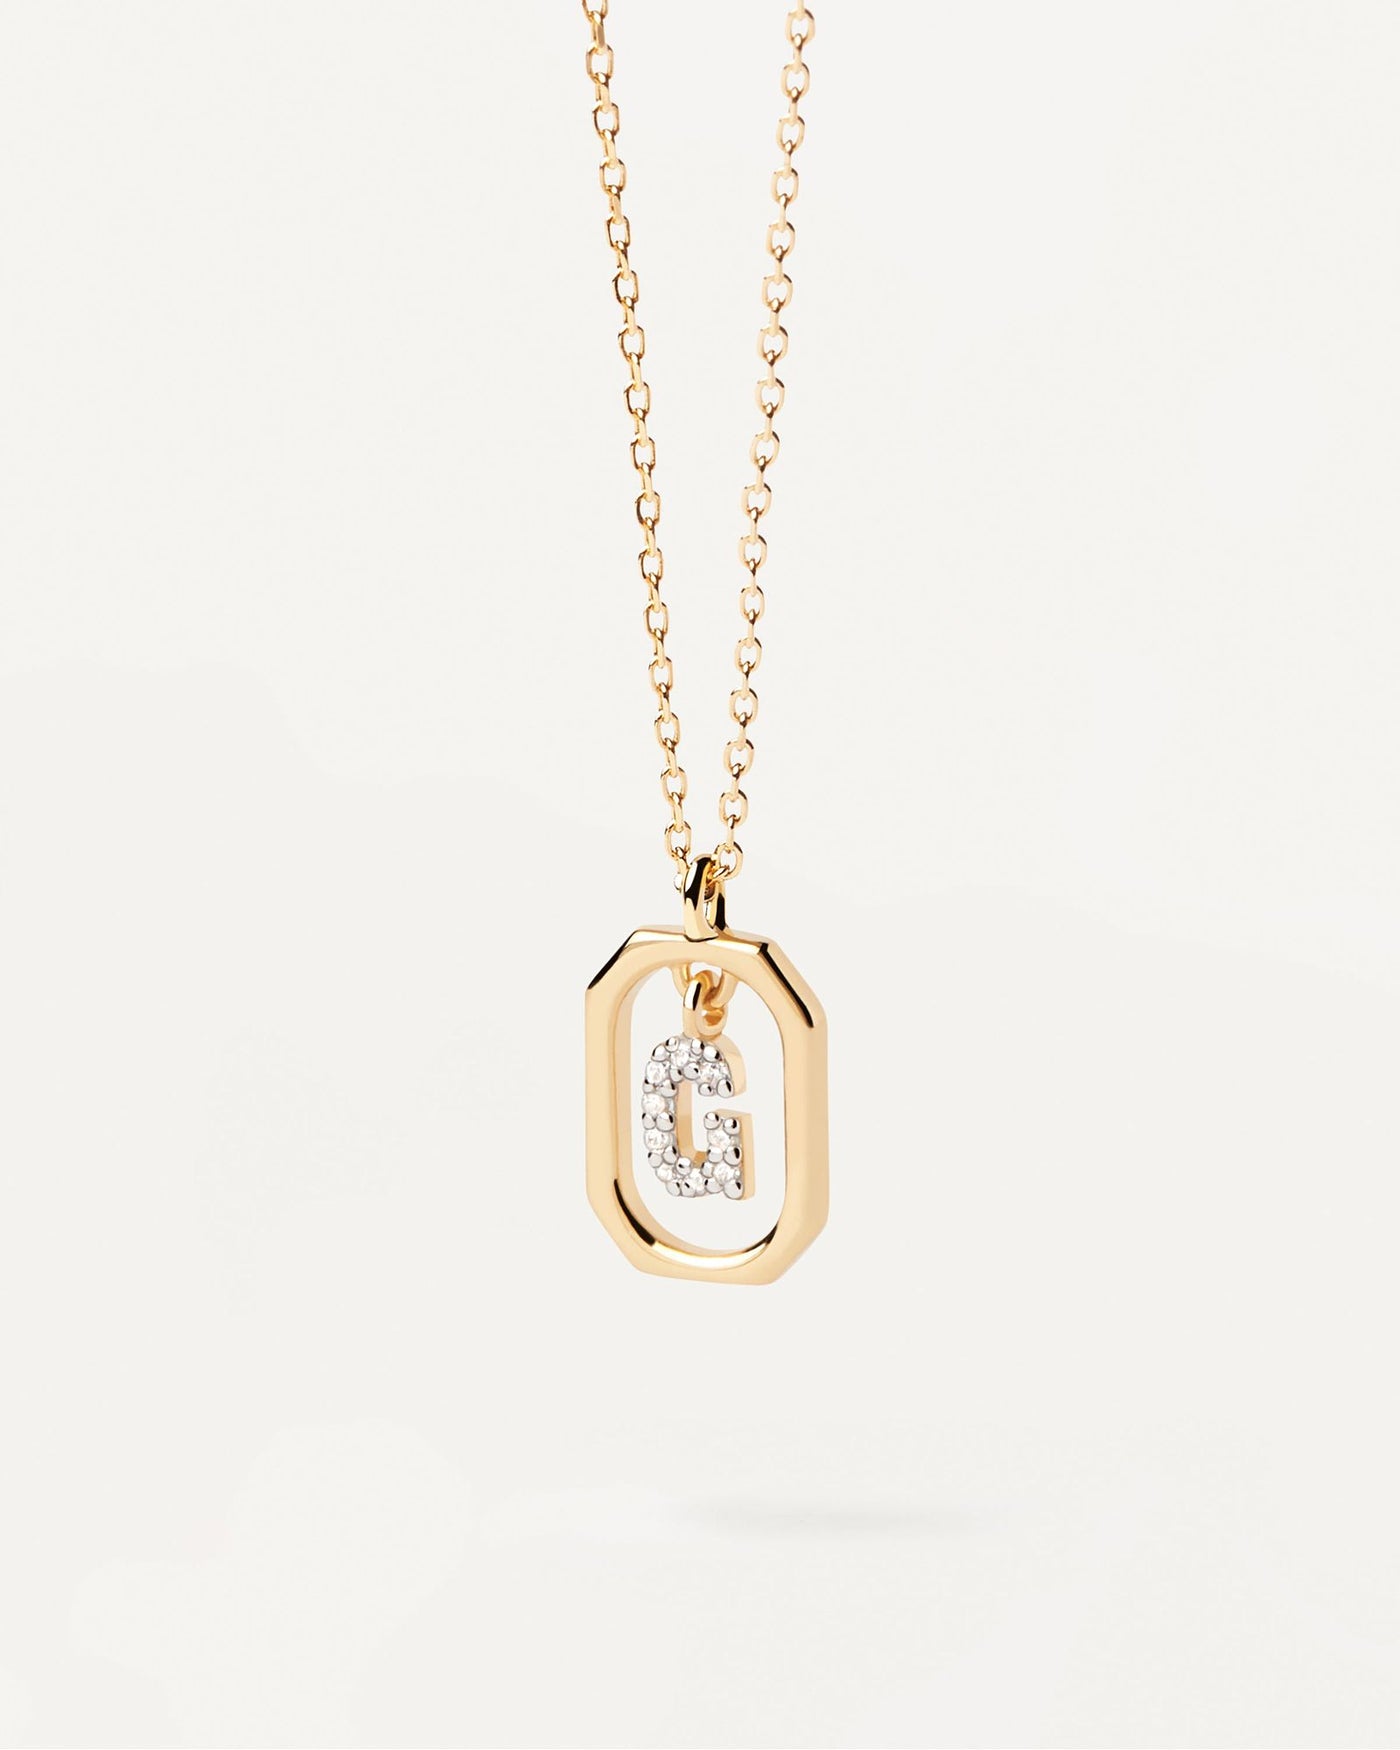 2024 Selection | Mini Letter G Necklace. Small initial G necklace in zirconia inside gold-plated silver octagonal pendant. Get the latest arrival from PDPAOLA. Place your order safely and get this Best Seller. Free Shipping.